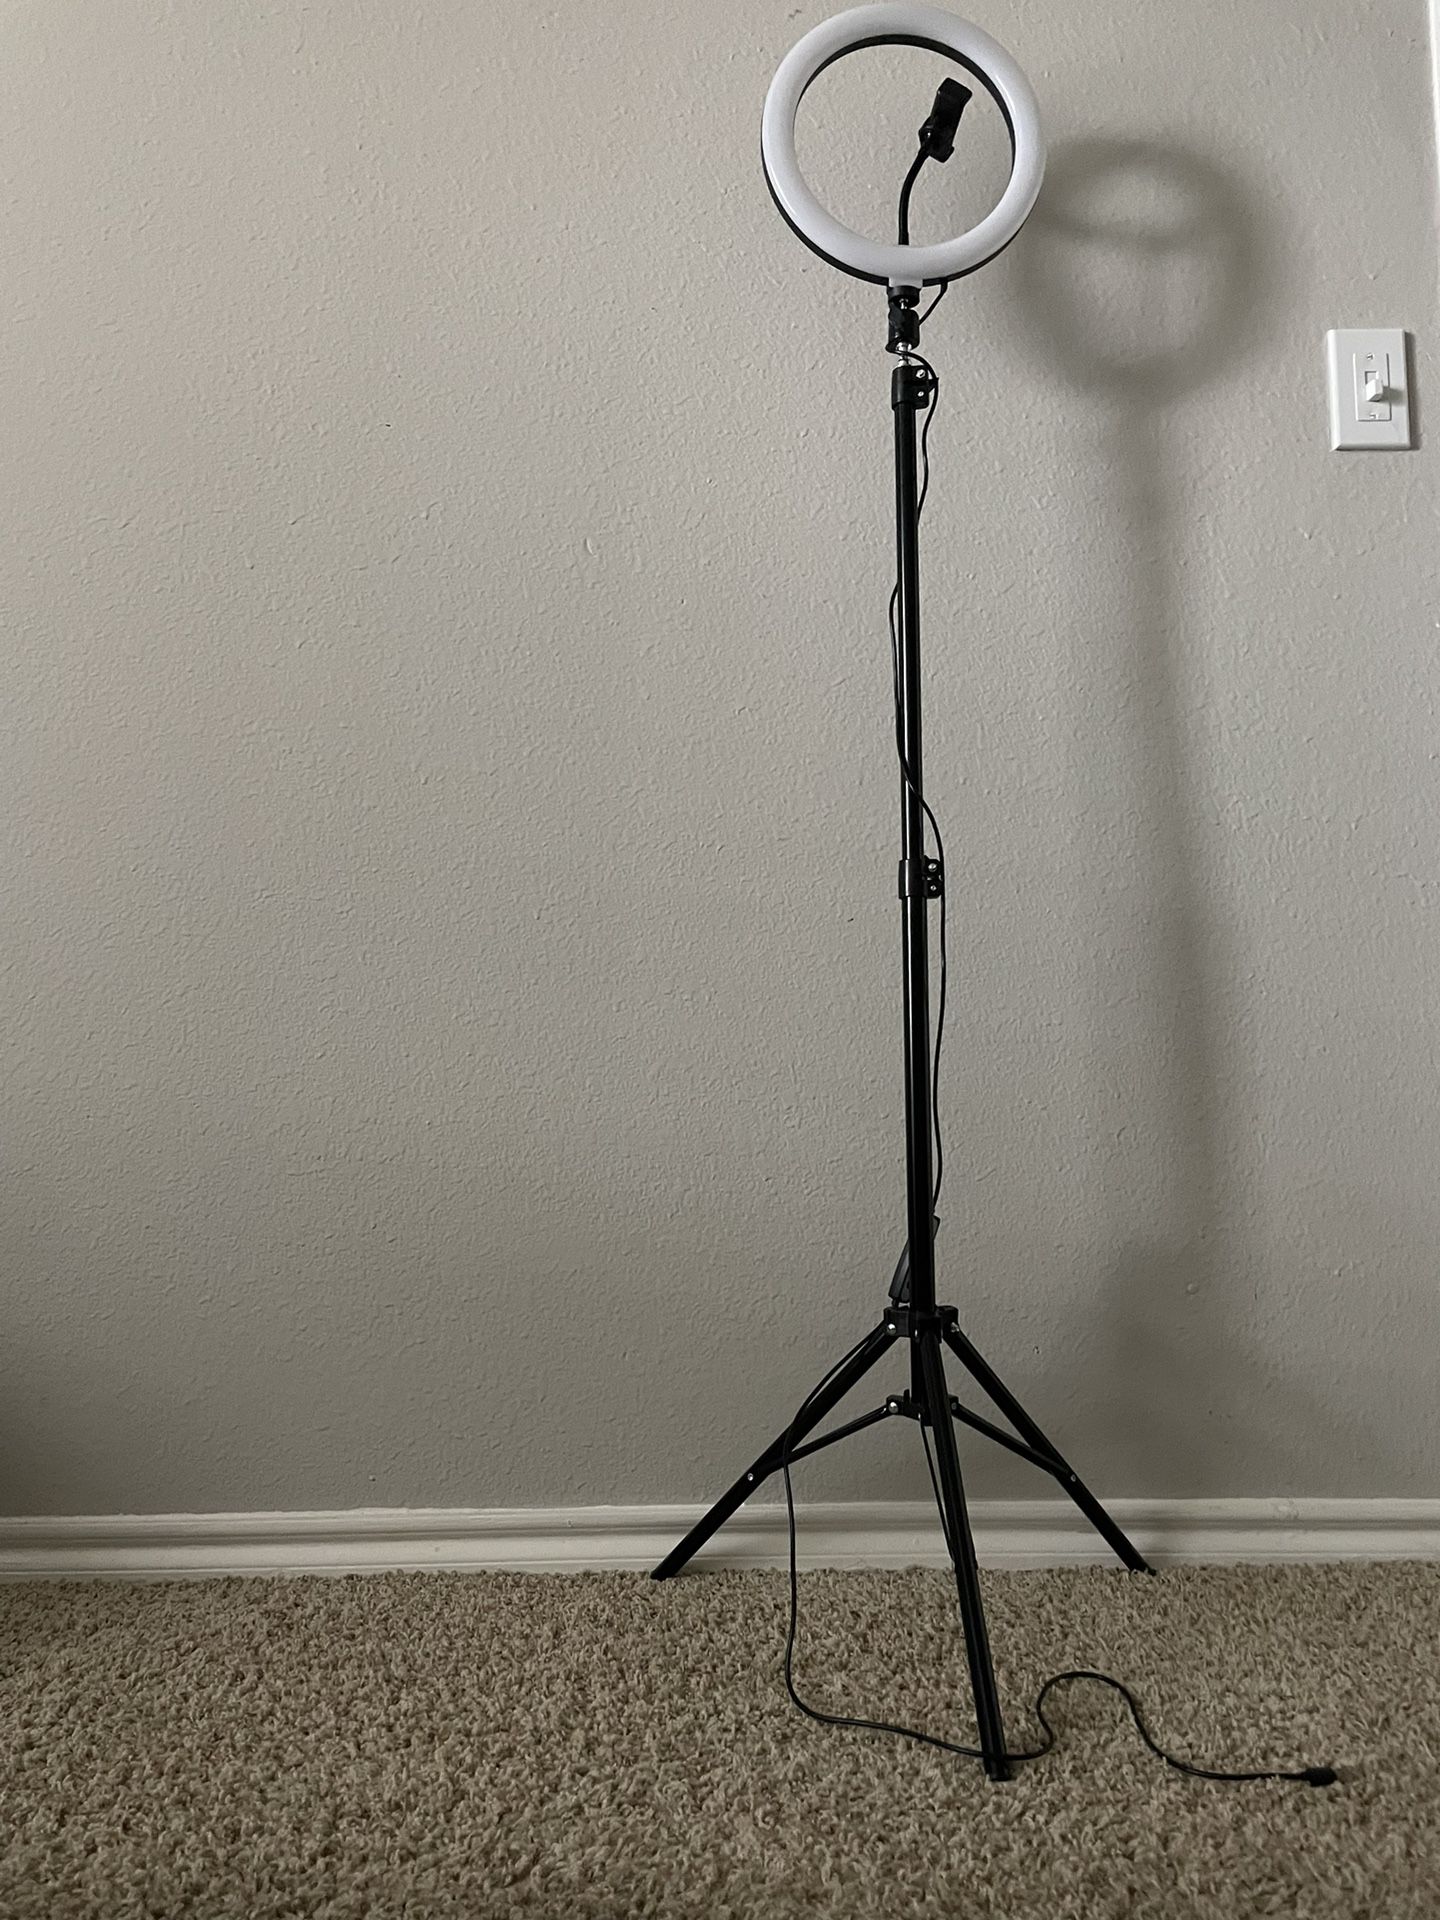 Selfie ring Light And Stand For Makeup And Live Streaming